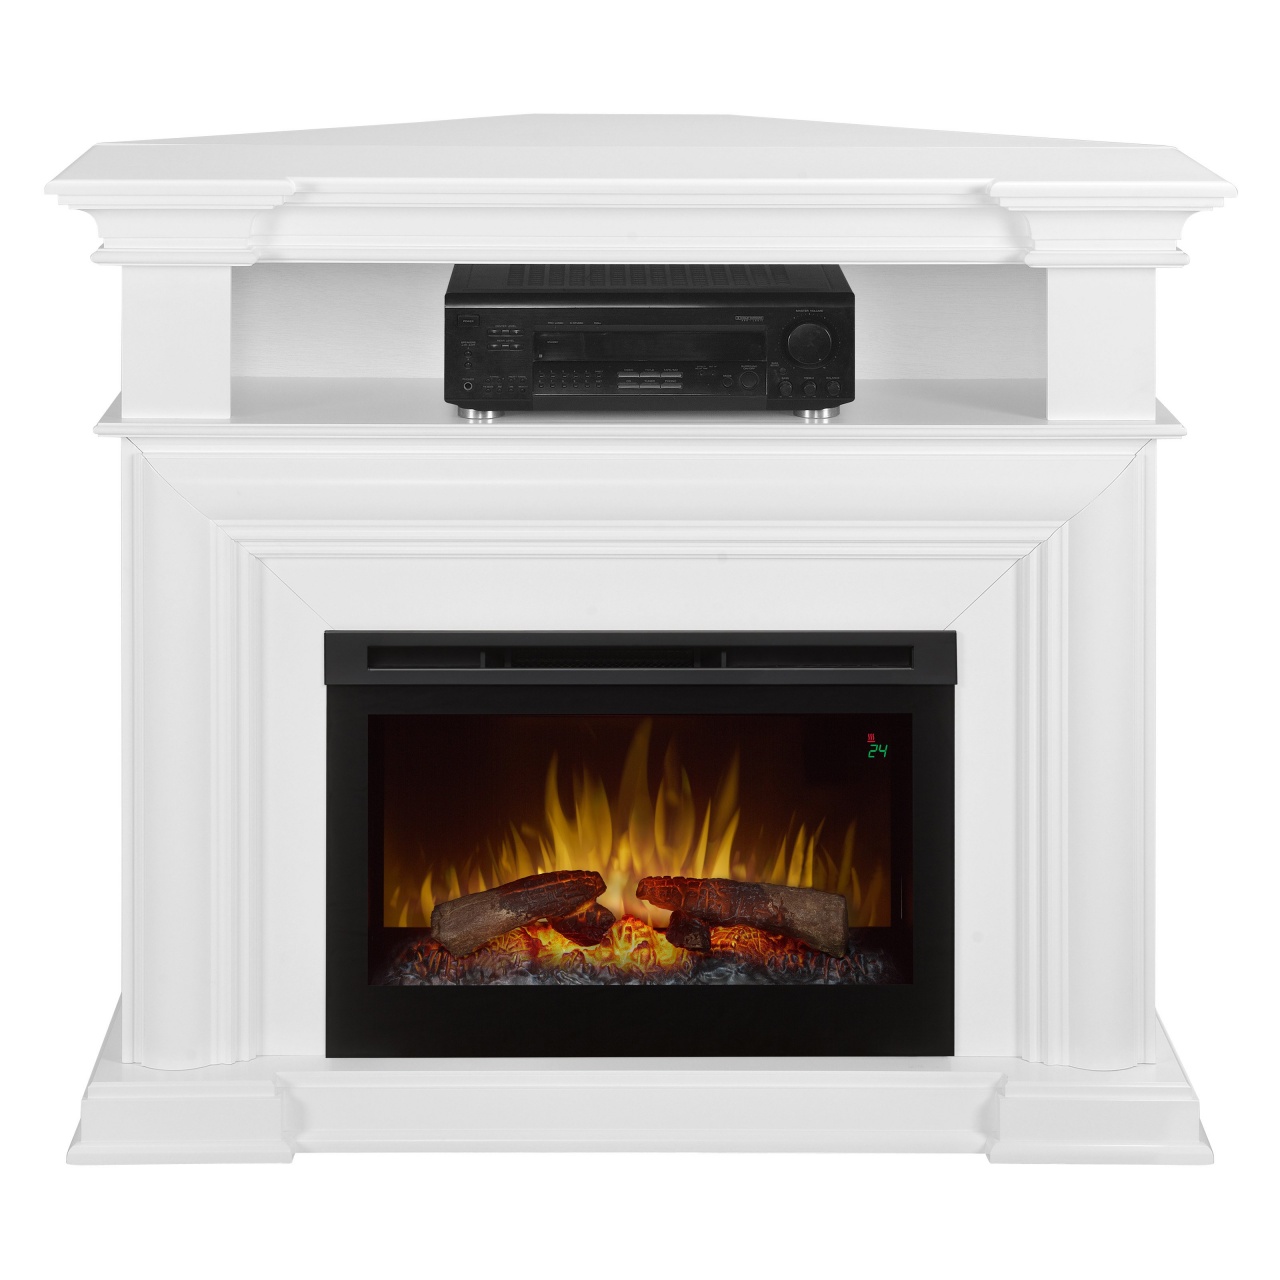 Big Lots Fireplaces Fresh Pigeon forge Hotels with Jacuzzi and Fireplace – Fireplace